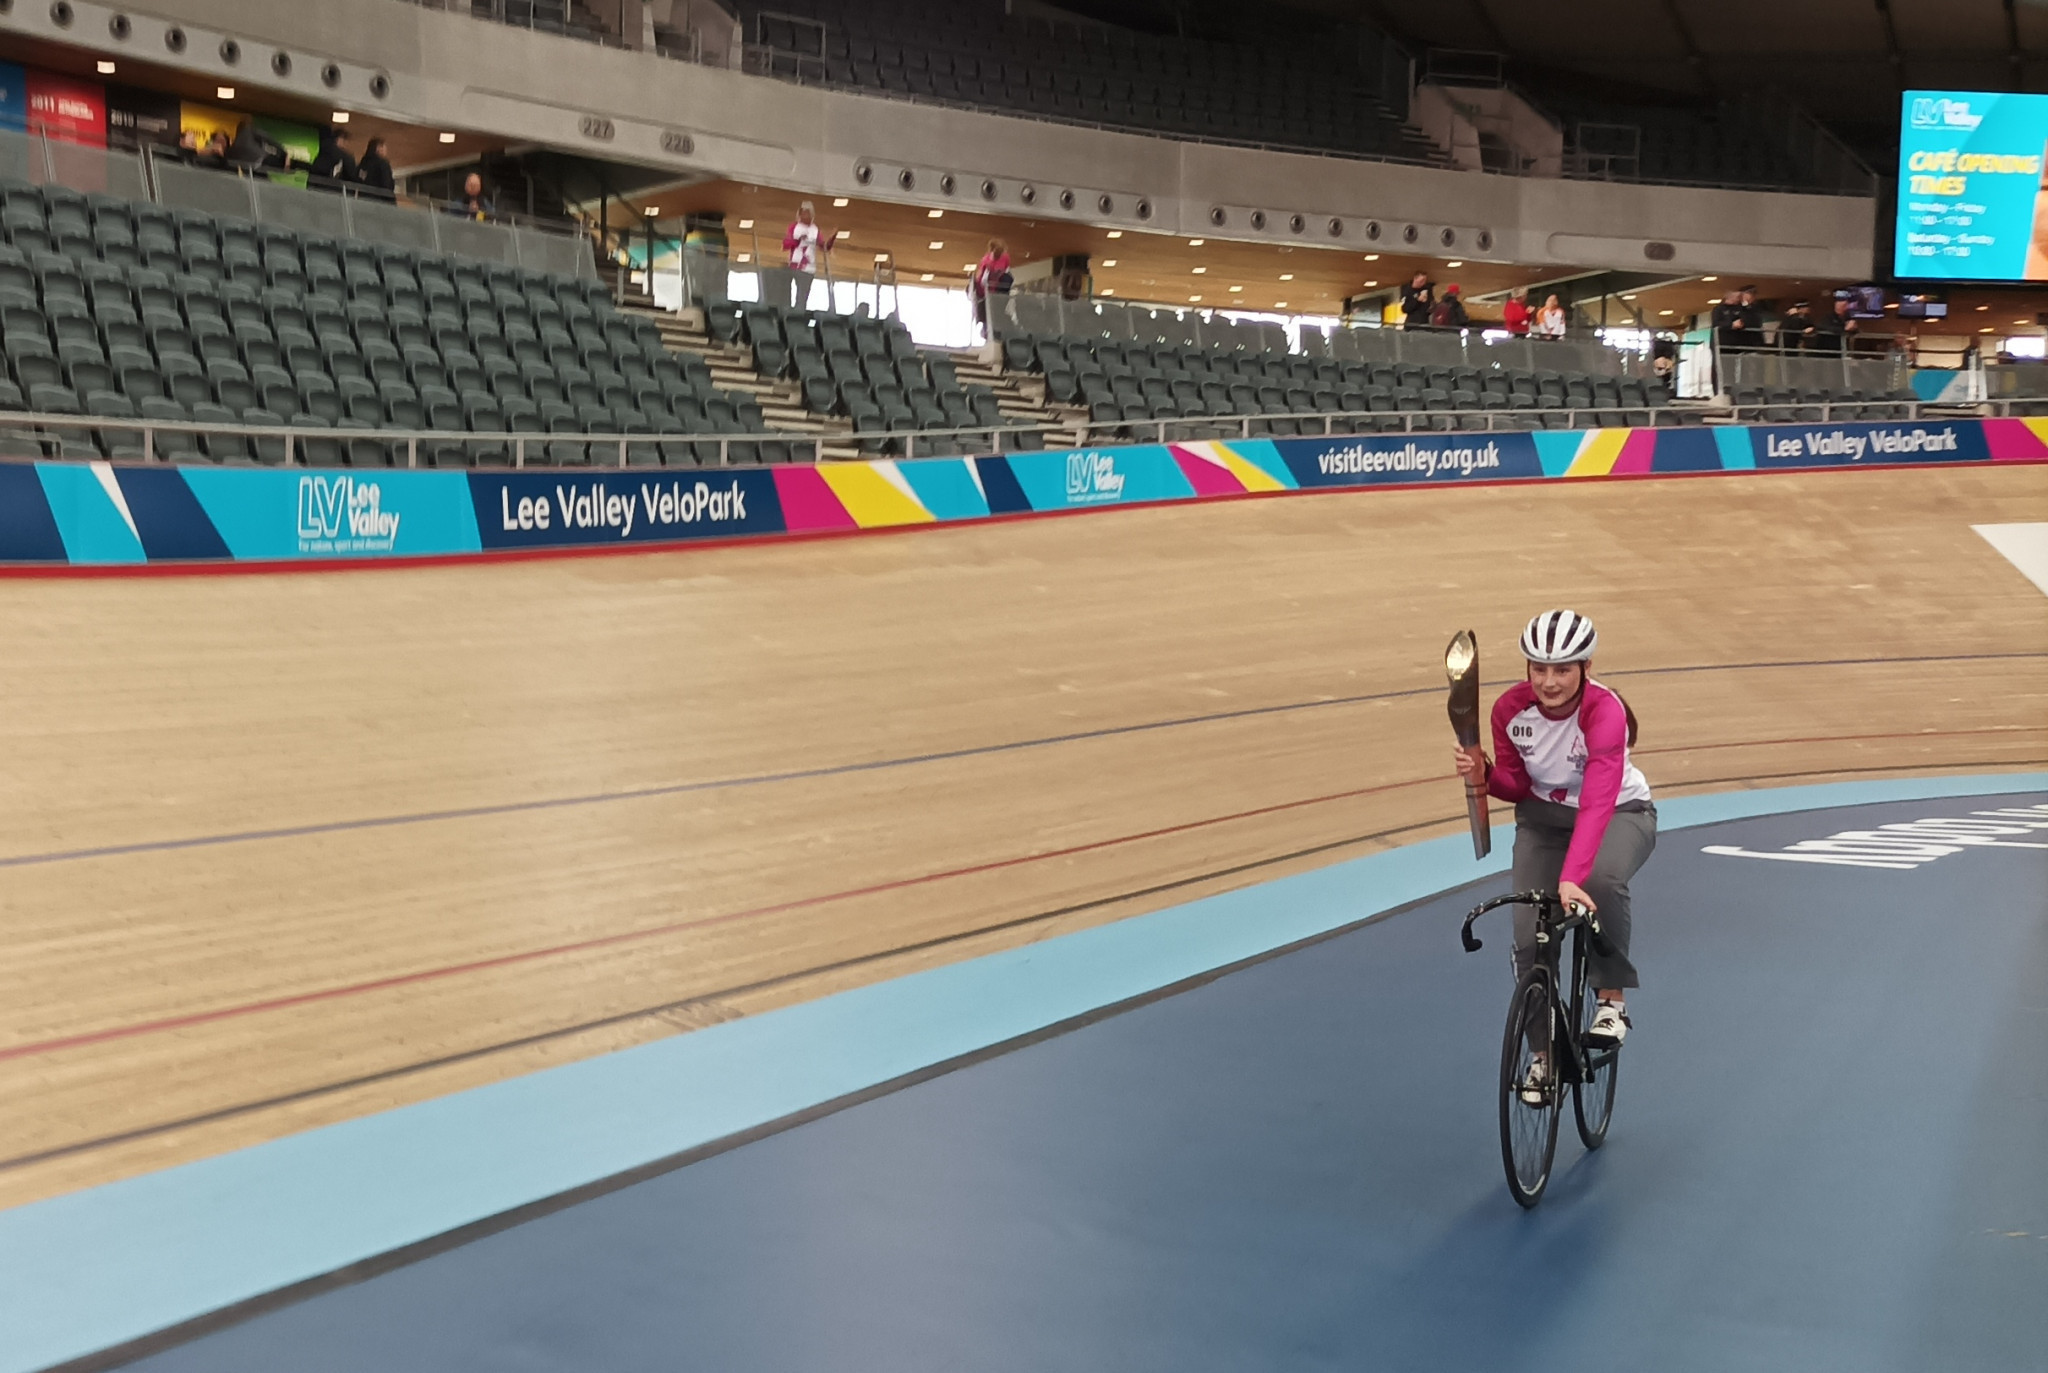 The Baton then visited a Birmingham 2022 venue for the first time as a cyclist rode with it around the Lee Valley Velodrome which is set to stage track cycling during the Commonwealth Games ©ITG